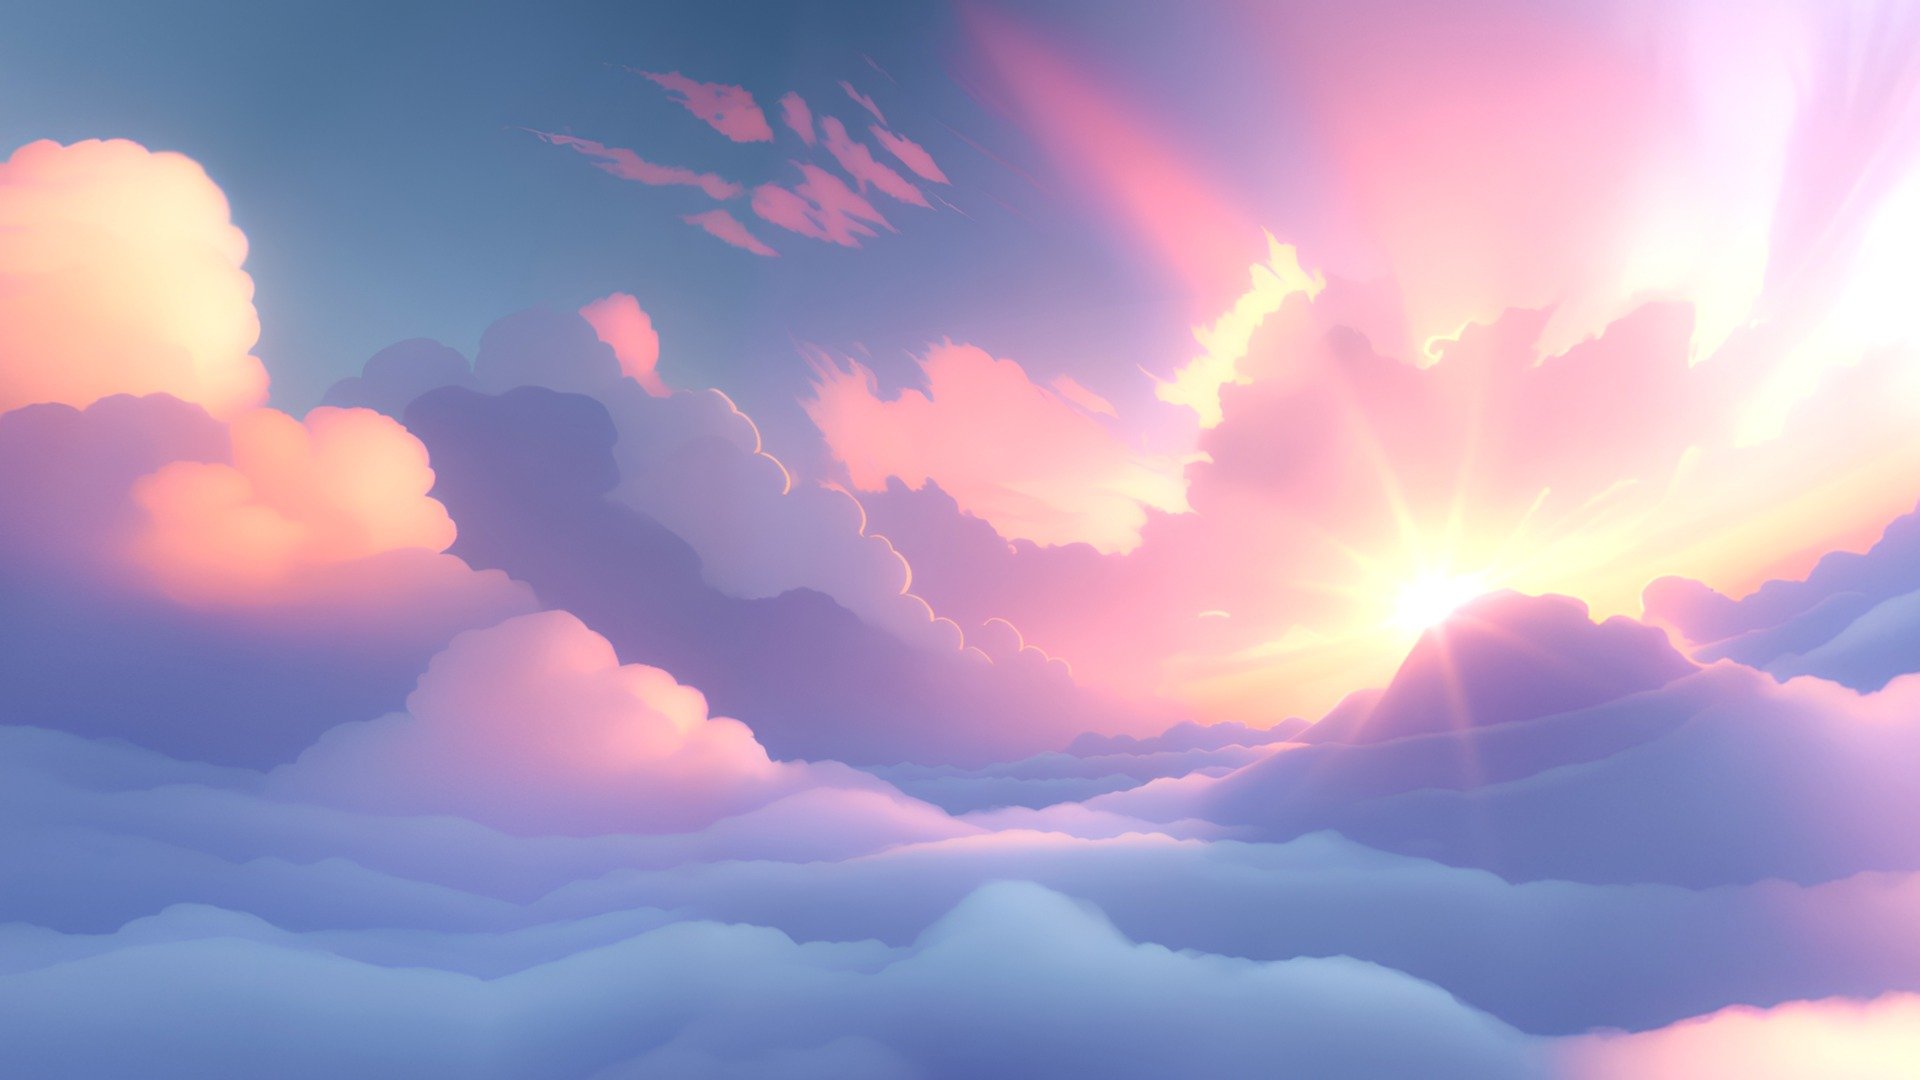 Beautiful stylized dreamy skybox. Perfect for beautiful, stylized environments and your rendering scene.

The package contains one panorama texture and one cubemap texture (png)

panorama texture: 8192 x 4096 

cubemap texture: 6144 x 4608 

Because of this size it is easier to customize more and better details if you want that. 

The sizes can be changed in your graphics program as desired

( textures are under Other available downloads)

used: AI, Photoshop

*-------------Terms of Use--------------

Commercial use of the assets provided is permitted but cannot be included in an asset pack or sold at any sort of asset/resource marketplace or be shared for free* - Stylized Cloudy Sky - Buy Royalty Free 3D model by stylized skybox (@skybox_) 3d model